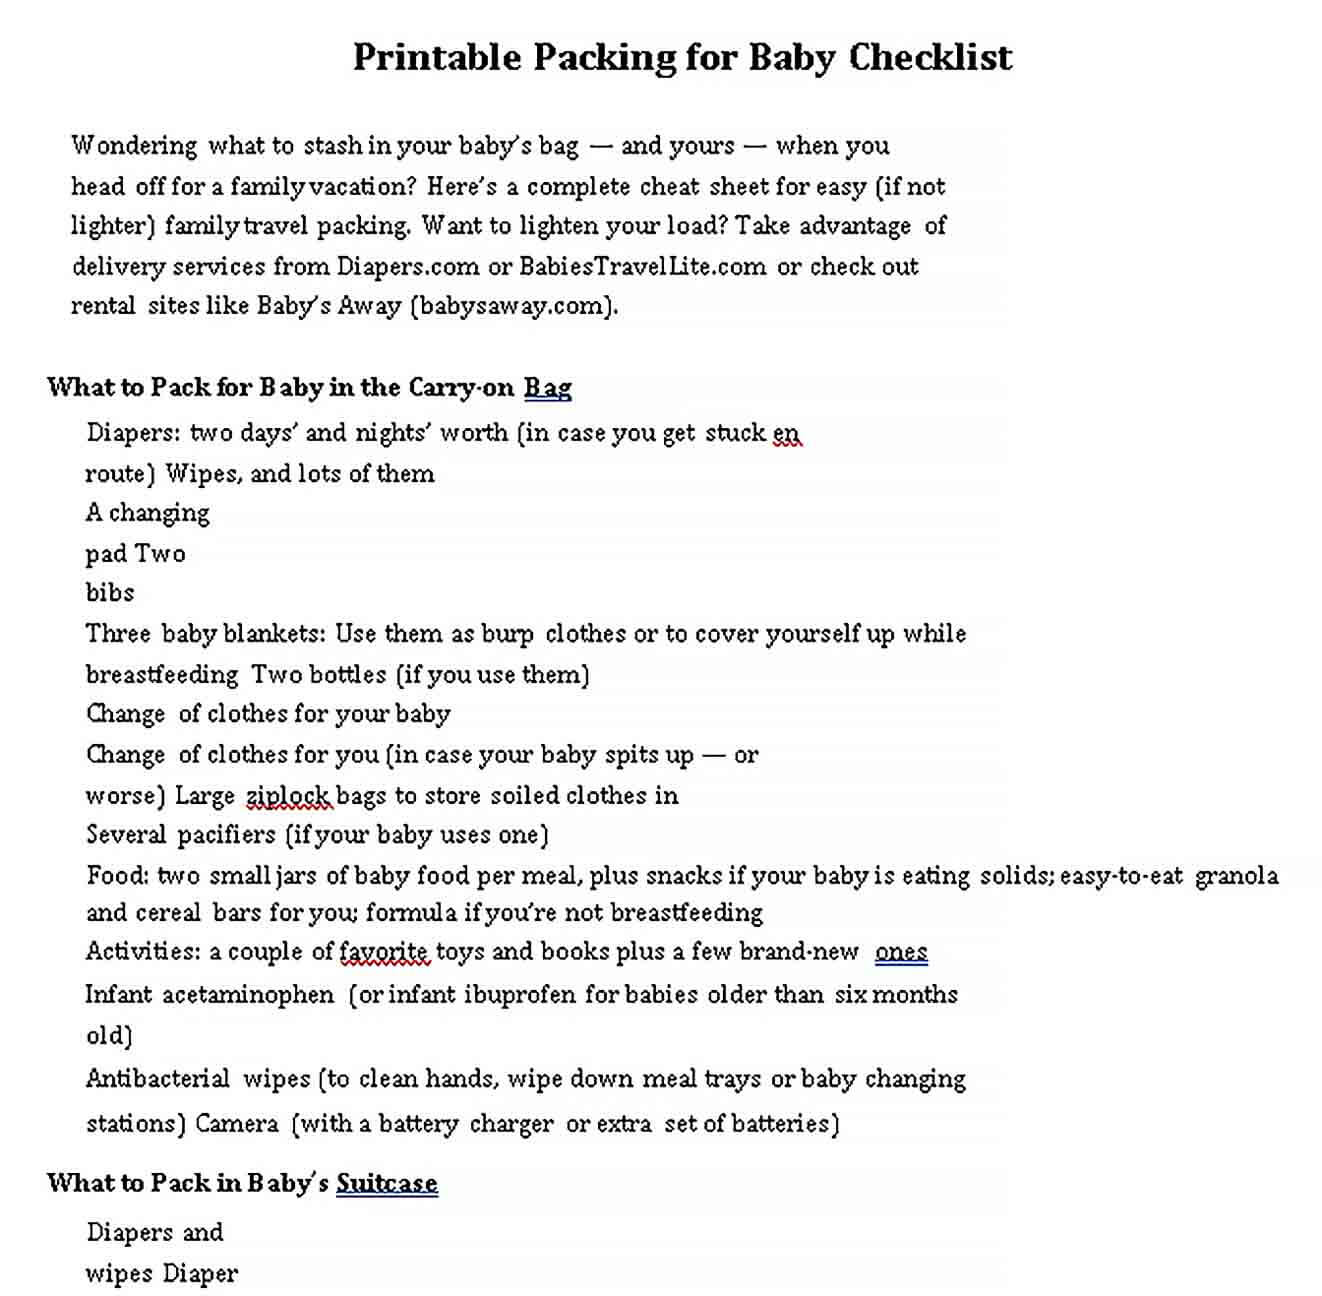 Sample New Baby Packing Checklist